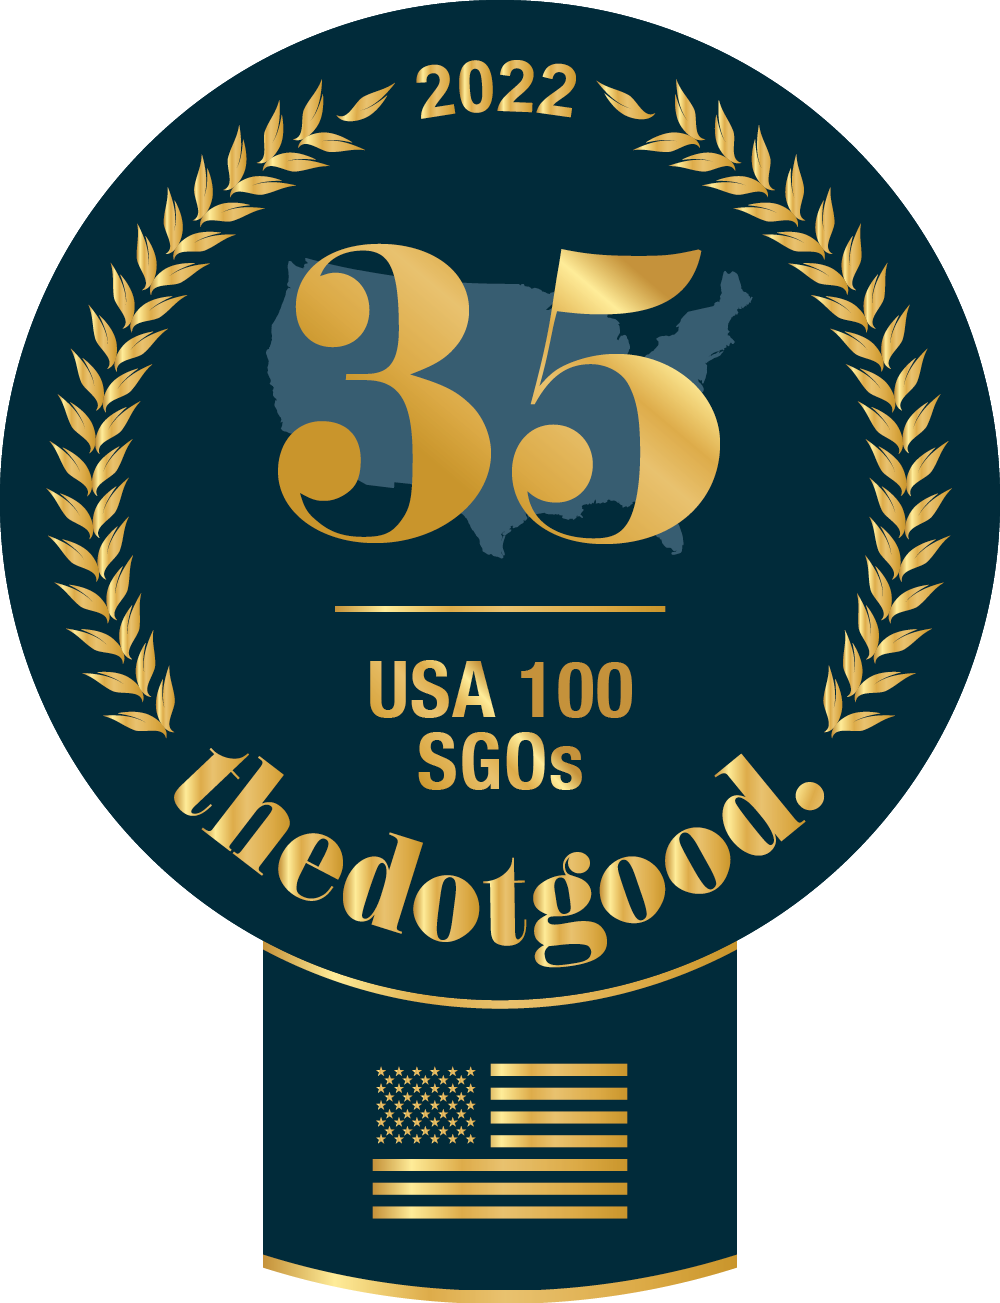 GENERATION is usa ranked on thedotgood.